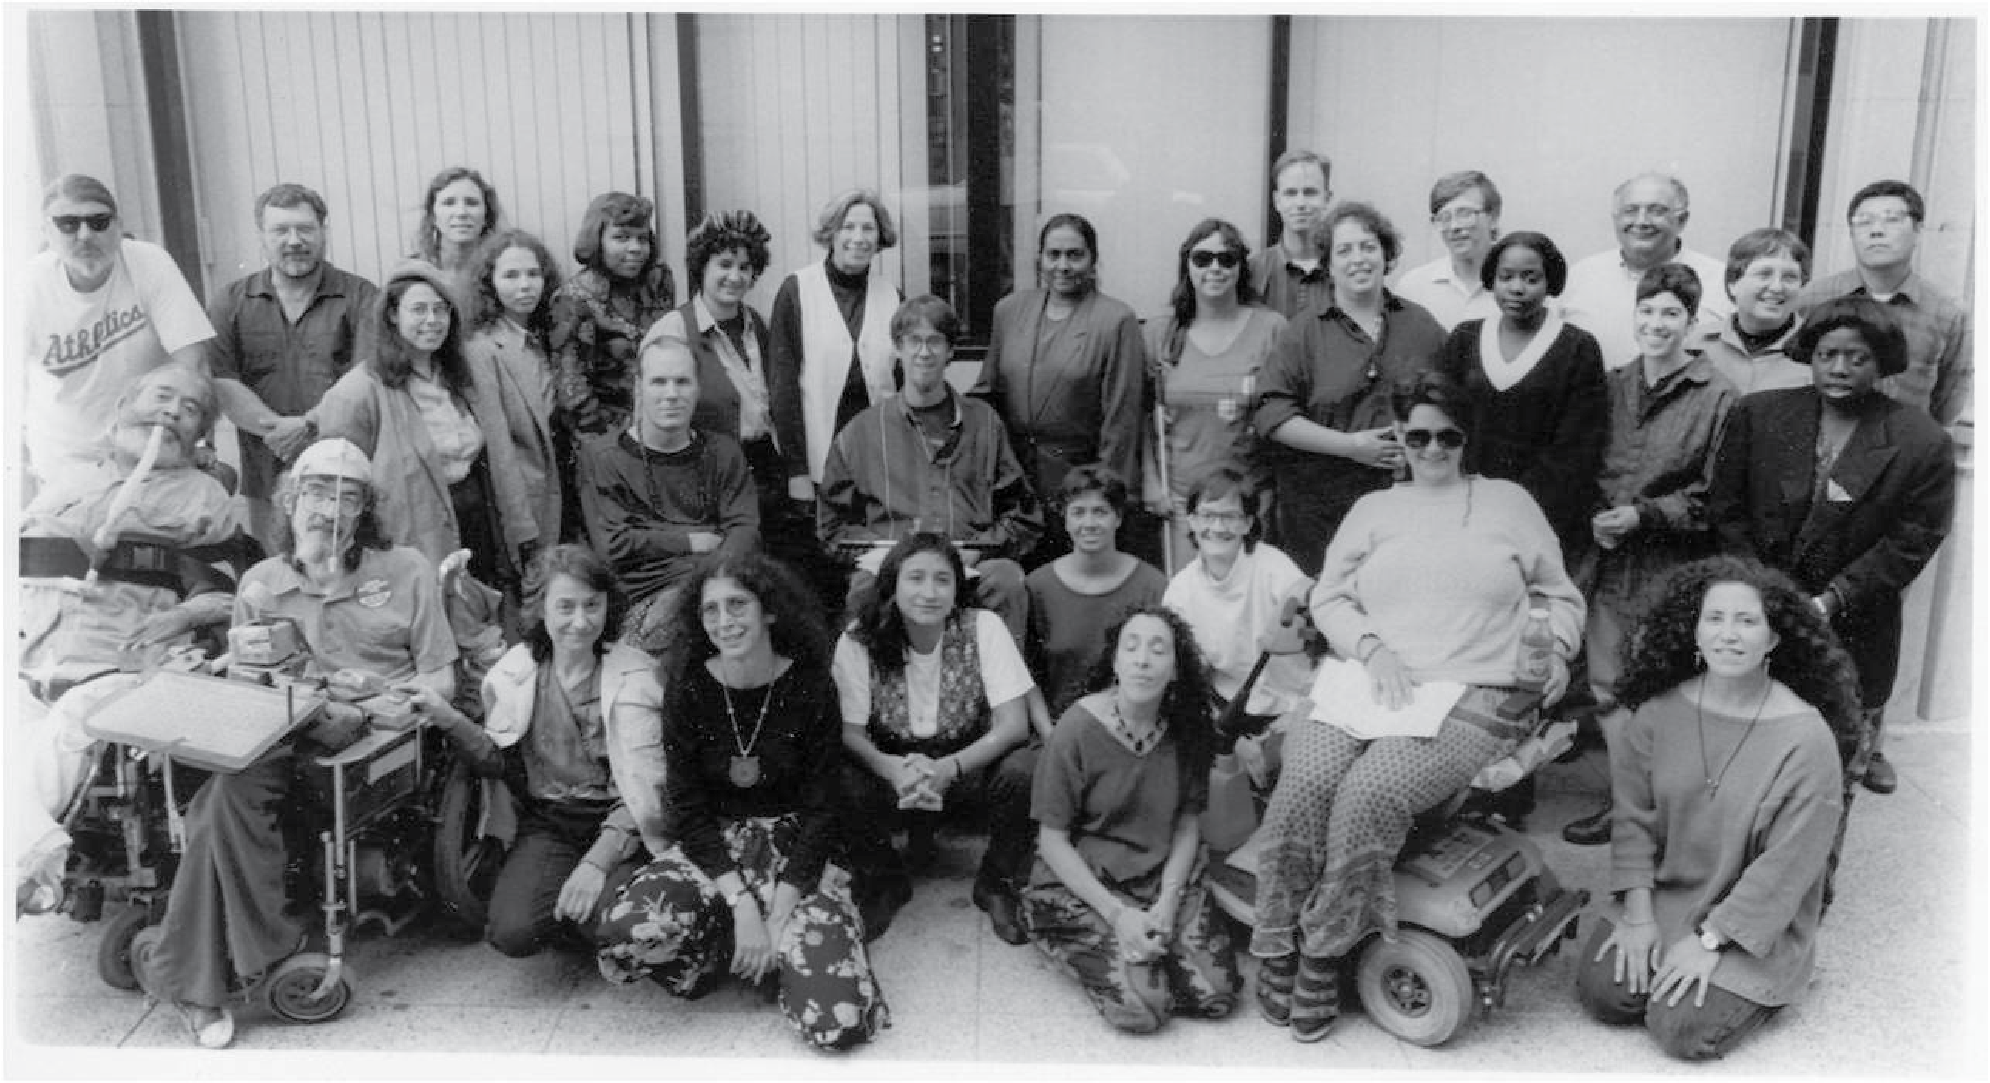 Black and white photo of WID staff of 30 people in the 80s/90s, including Ed and Joan